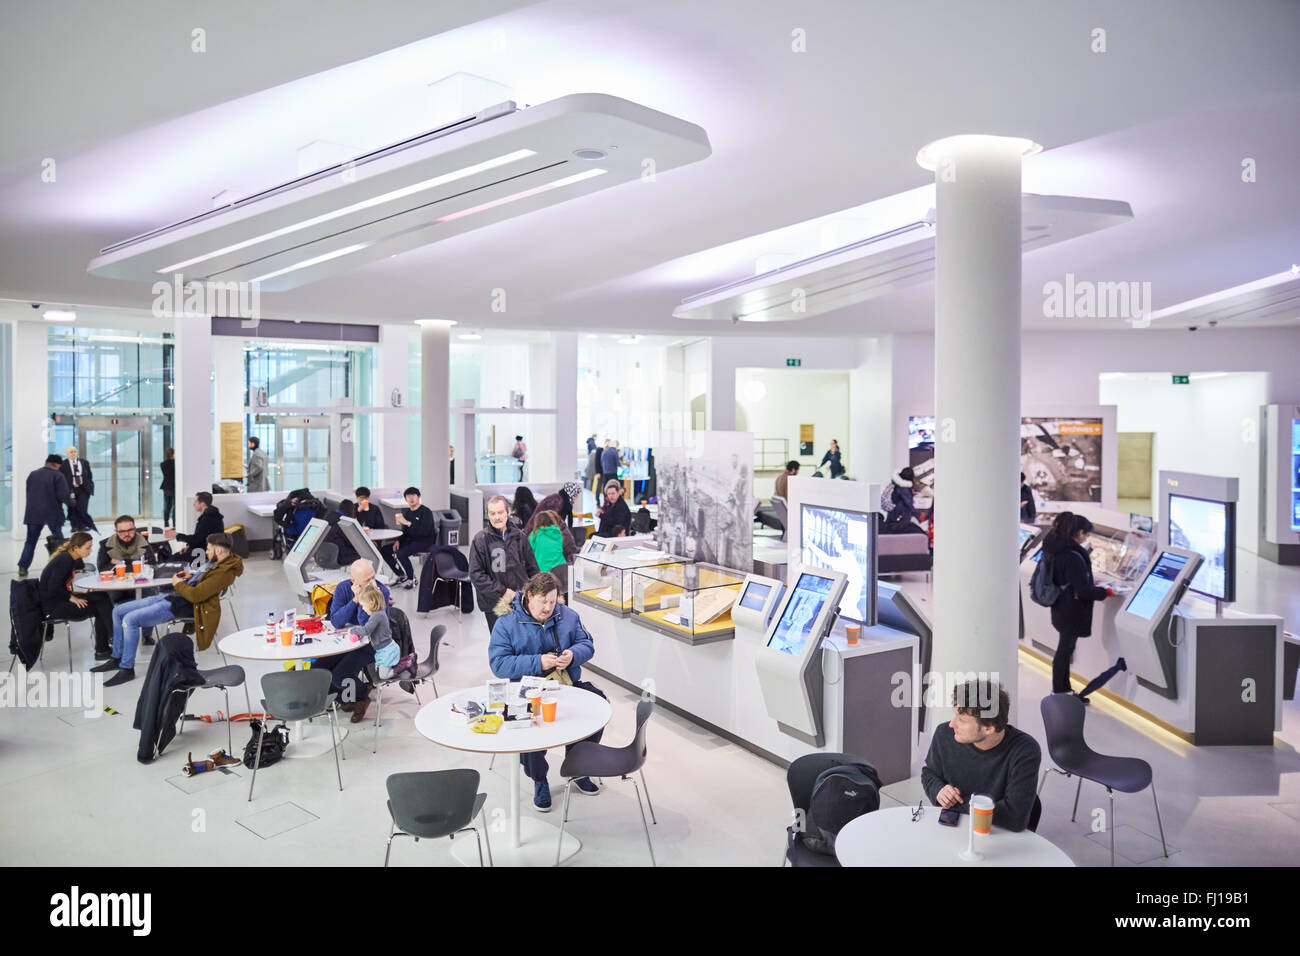 Manchester Central library   cafe area Historic history important significant modern redesign books public spaces government loc Stock Photo